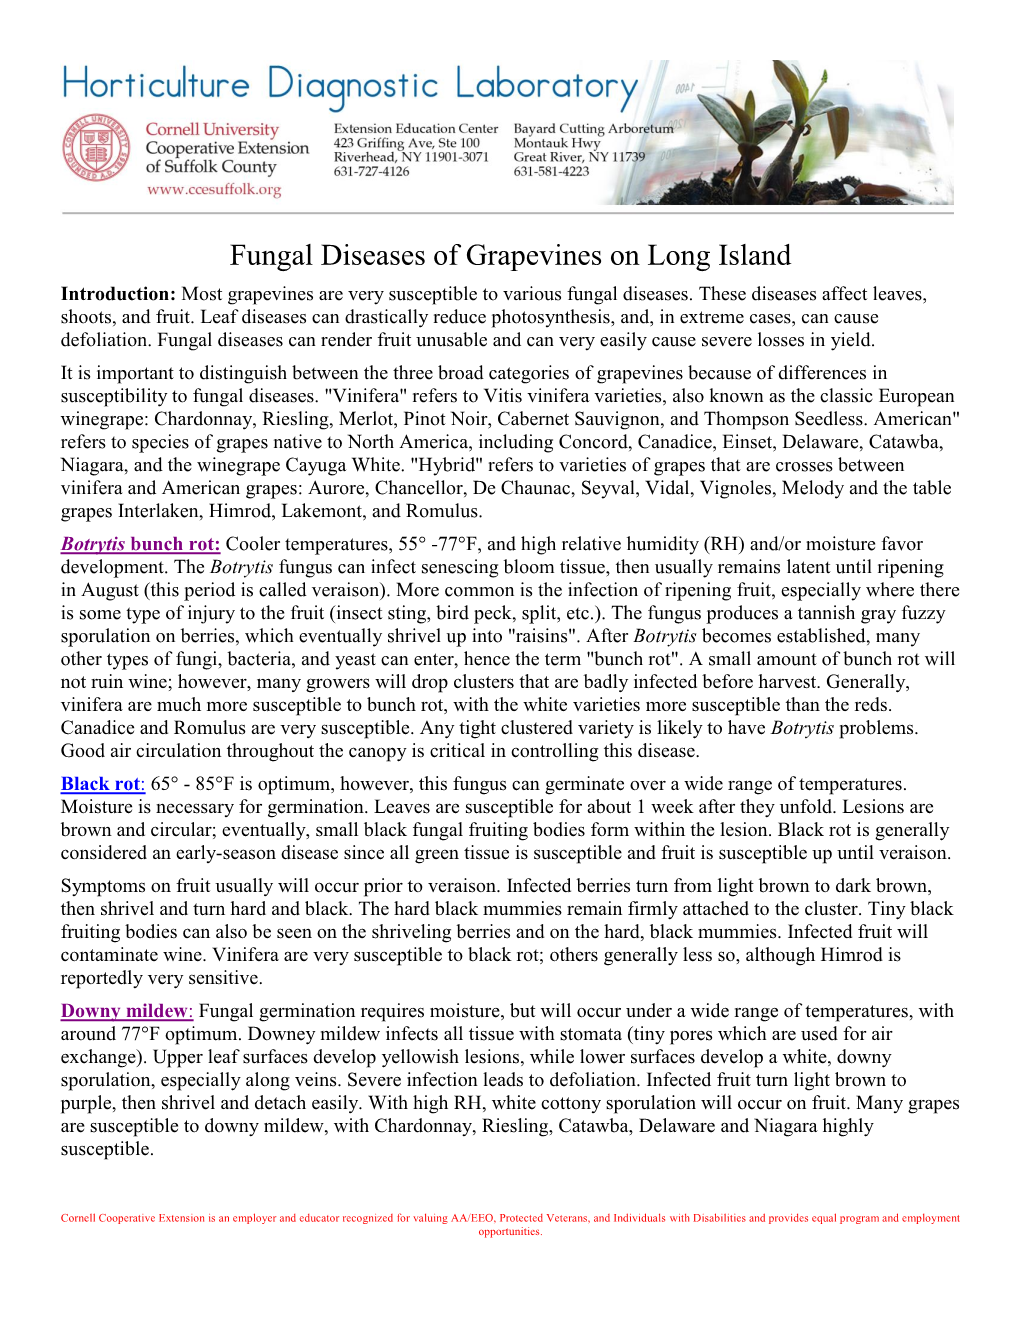 Fungal Diseases of Grapevines on Long Island Introduction: Most Grapevines Are Very Susceptible to Various Fungal Diseases